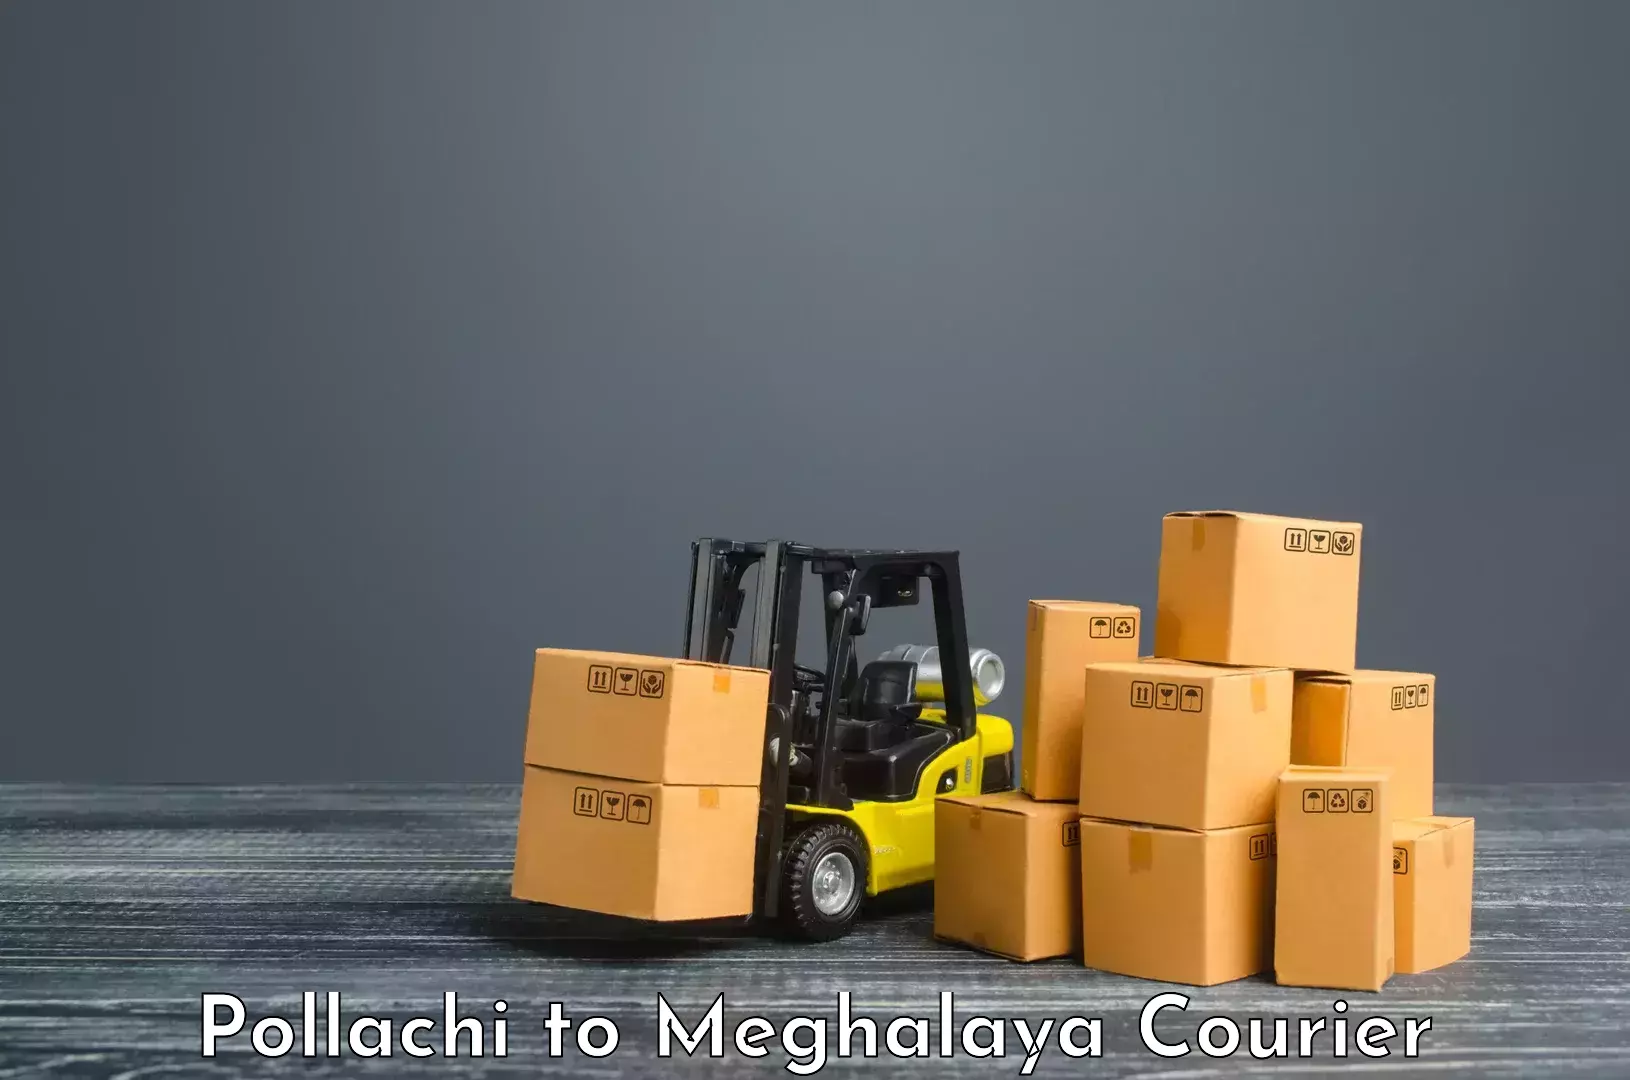 Express delivery network Pollachi to Umsaw